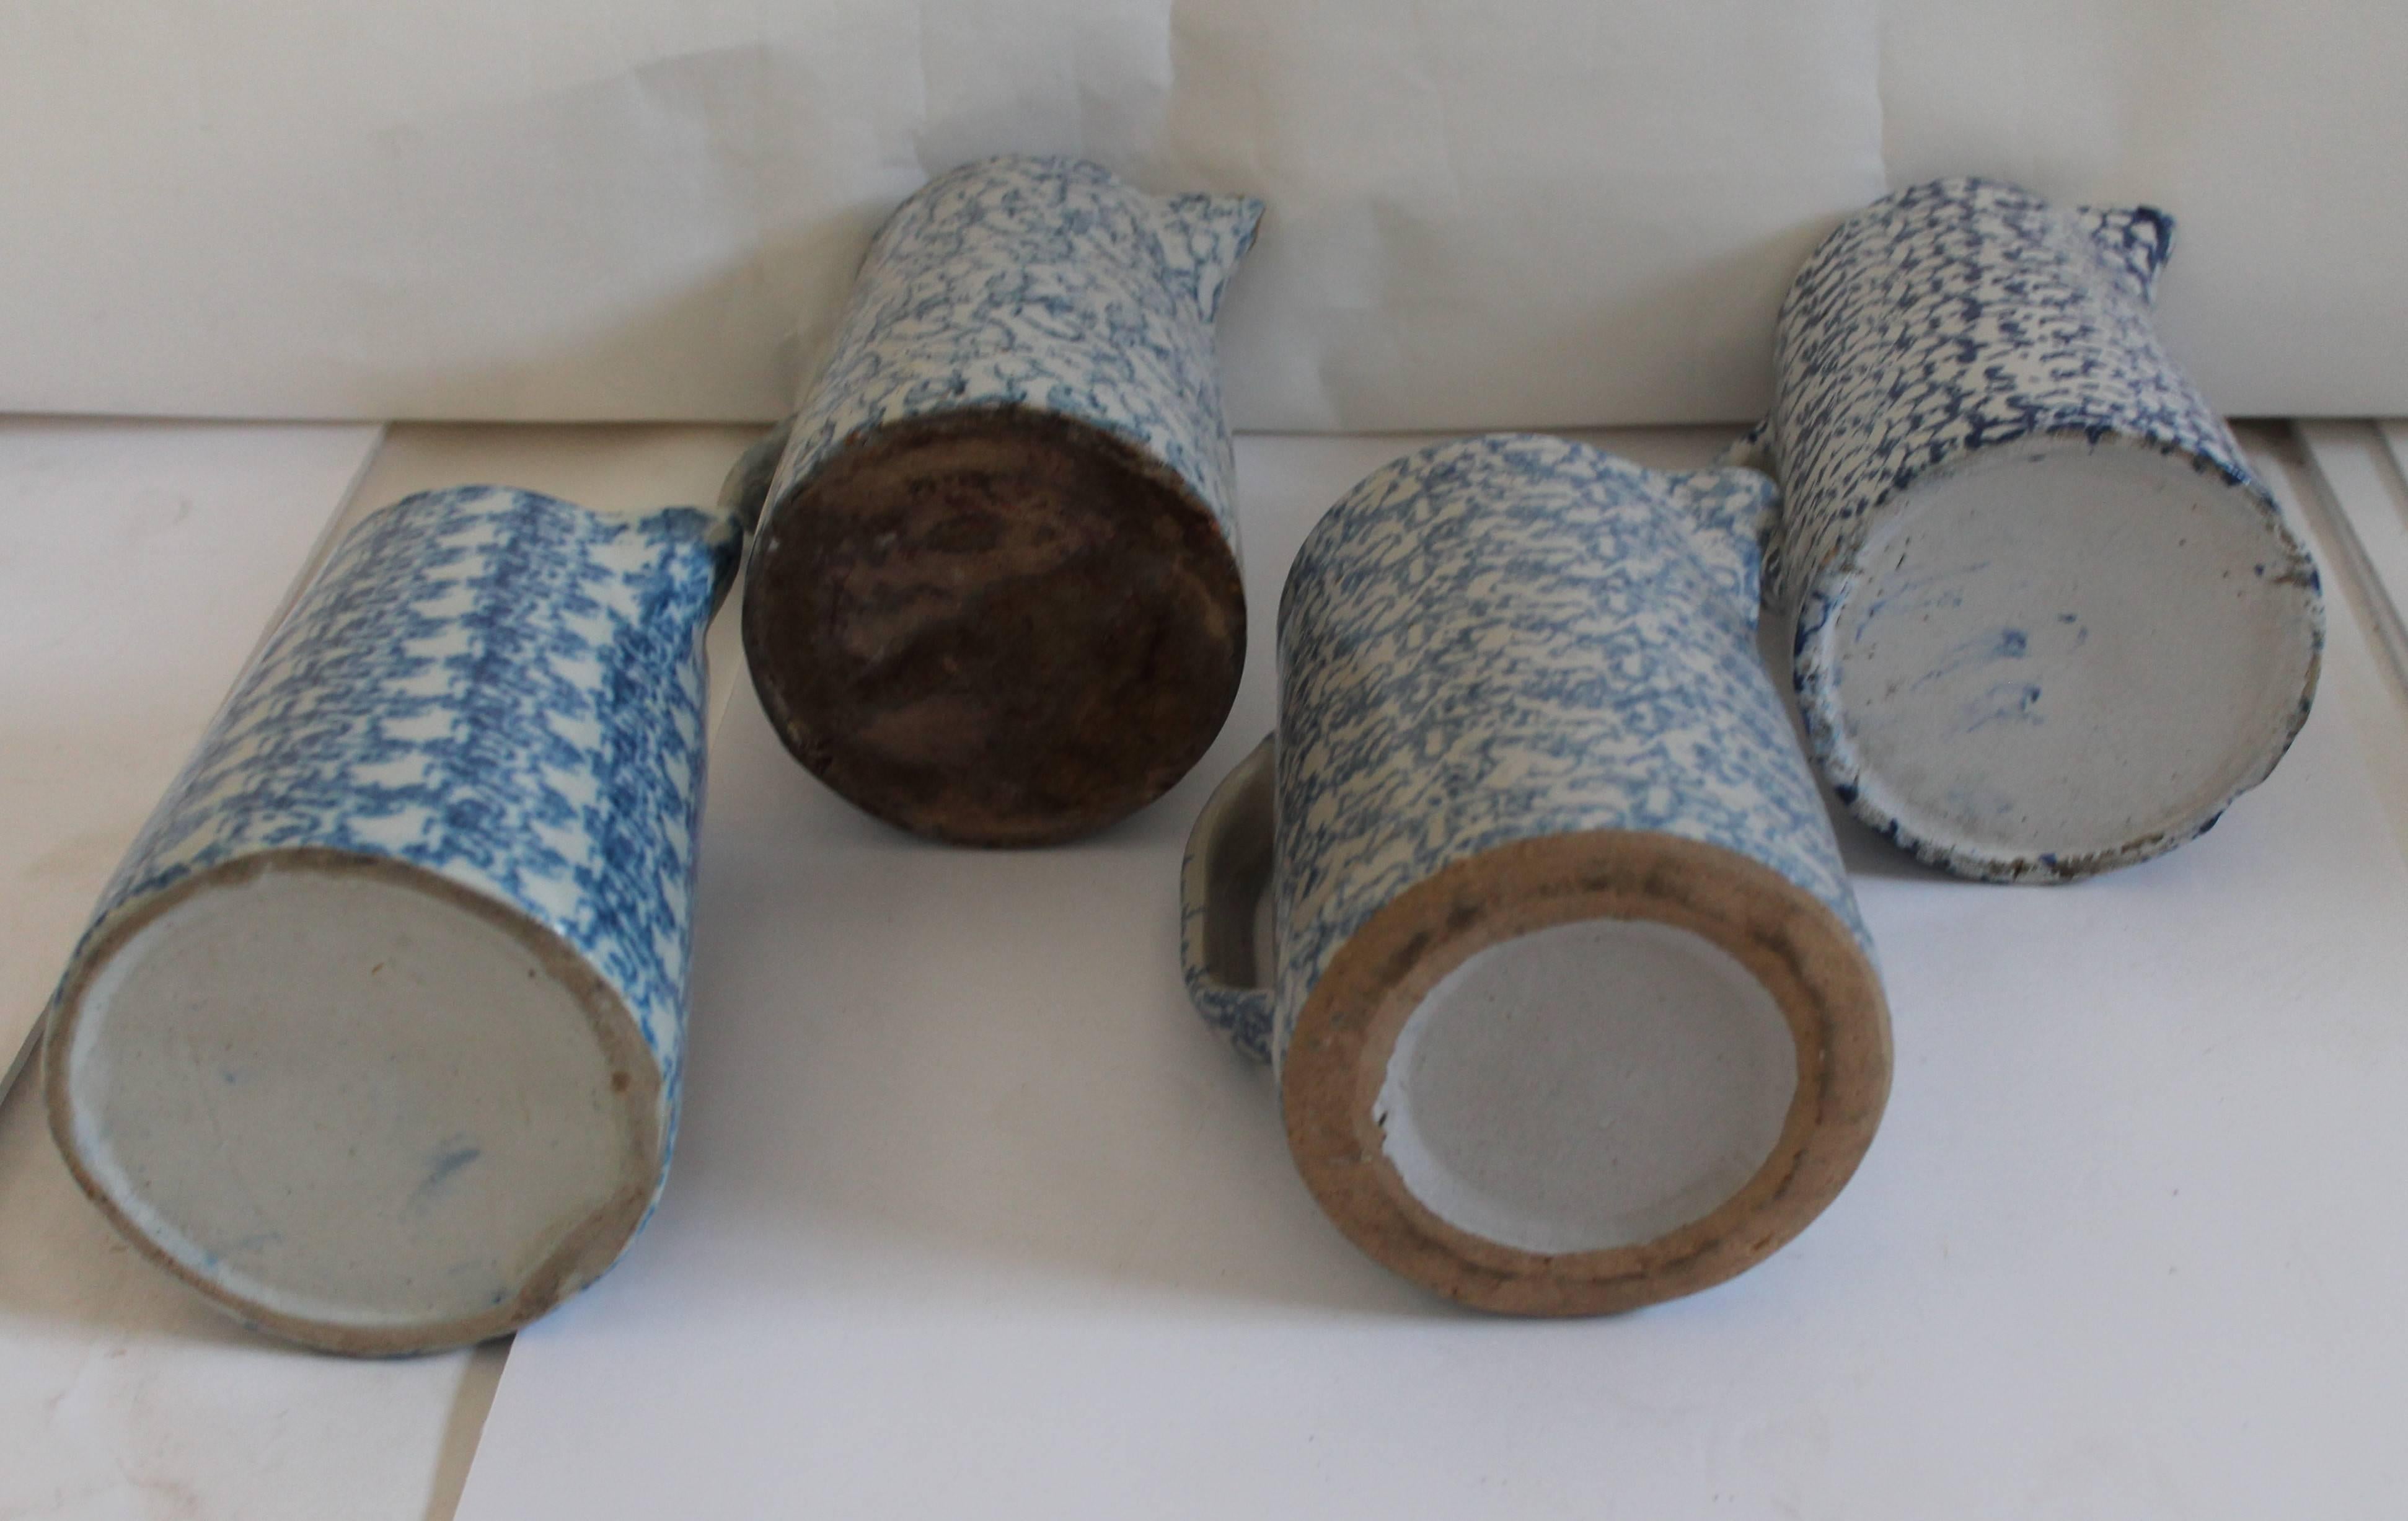 American Collection of Four 19th Century Spongeware Pottery Pitchers